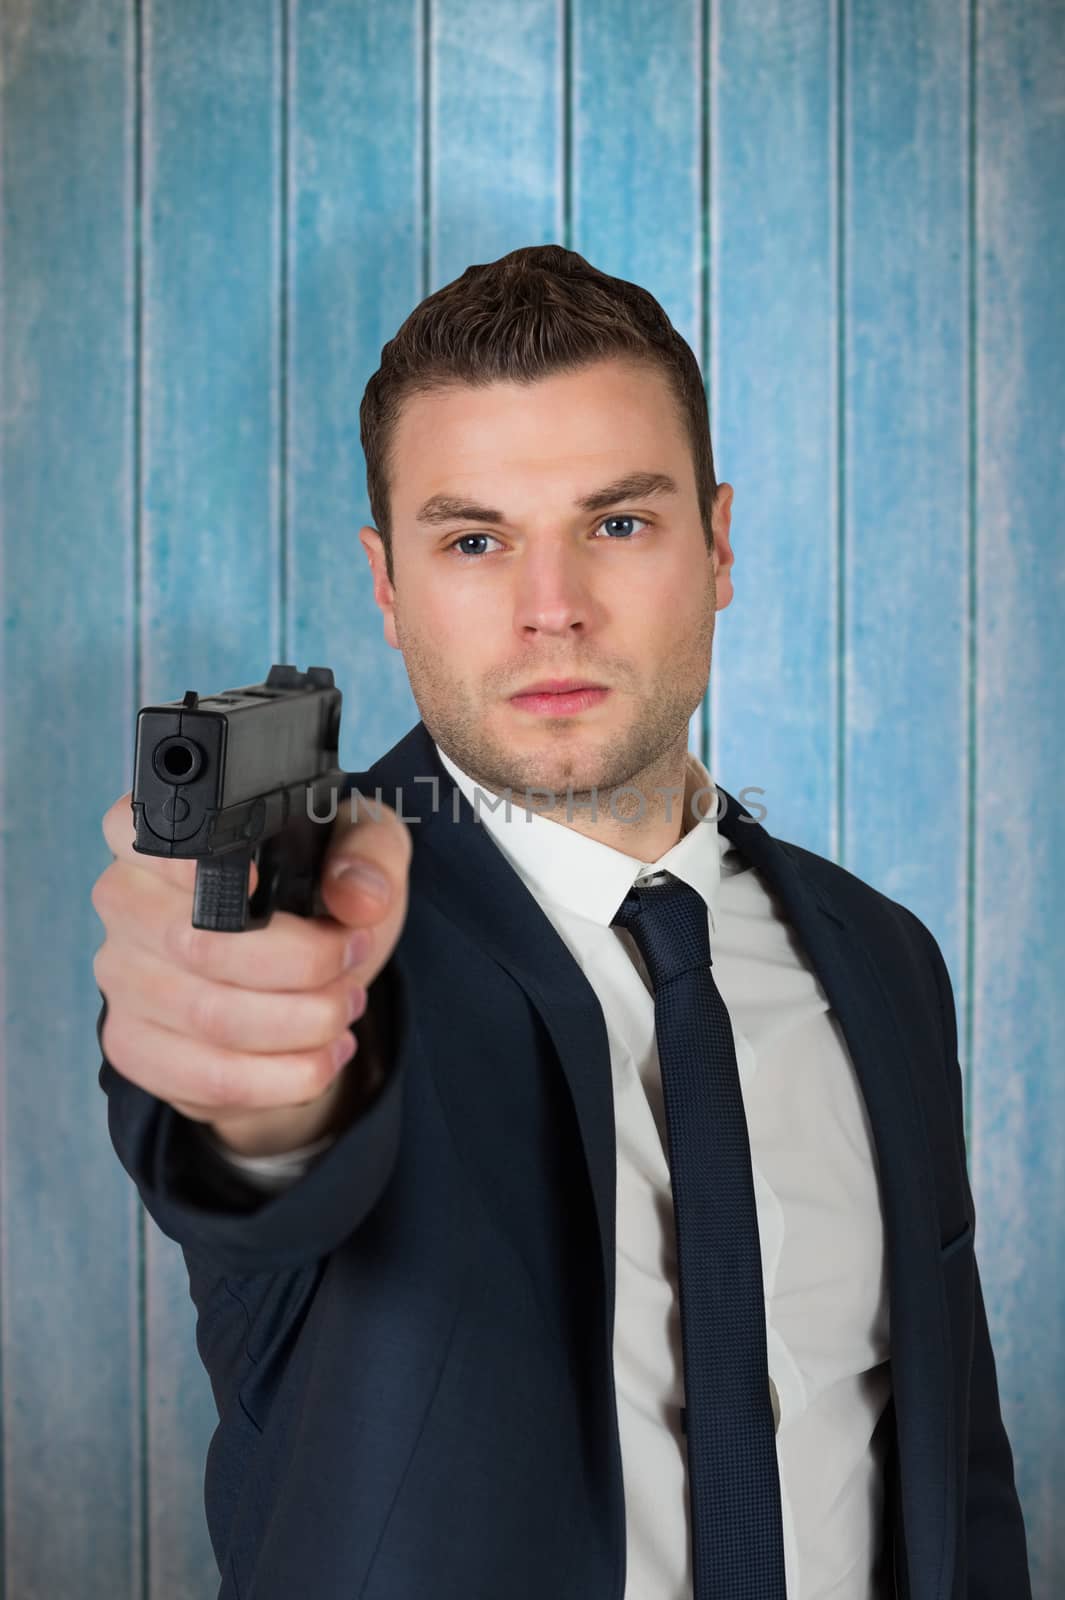 Composite image of serious businessman pointing a gun by Wavebreakmedia